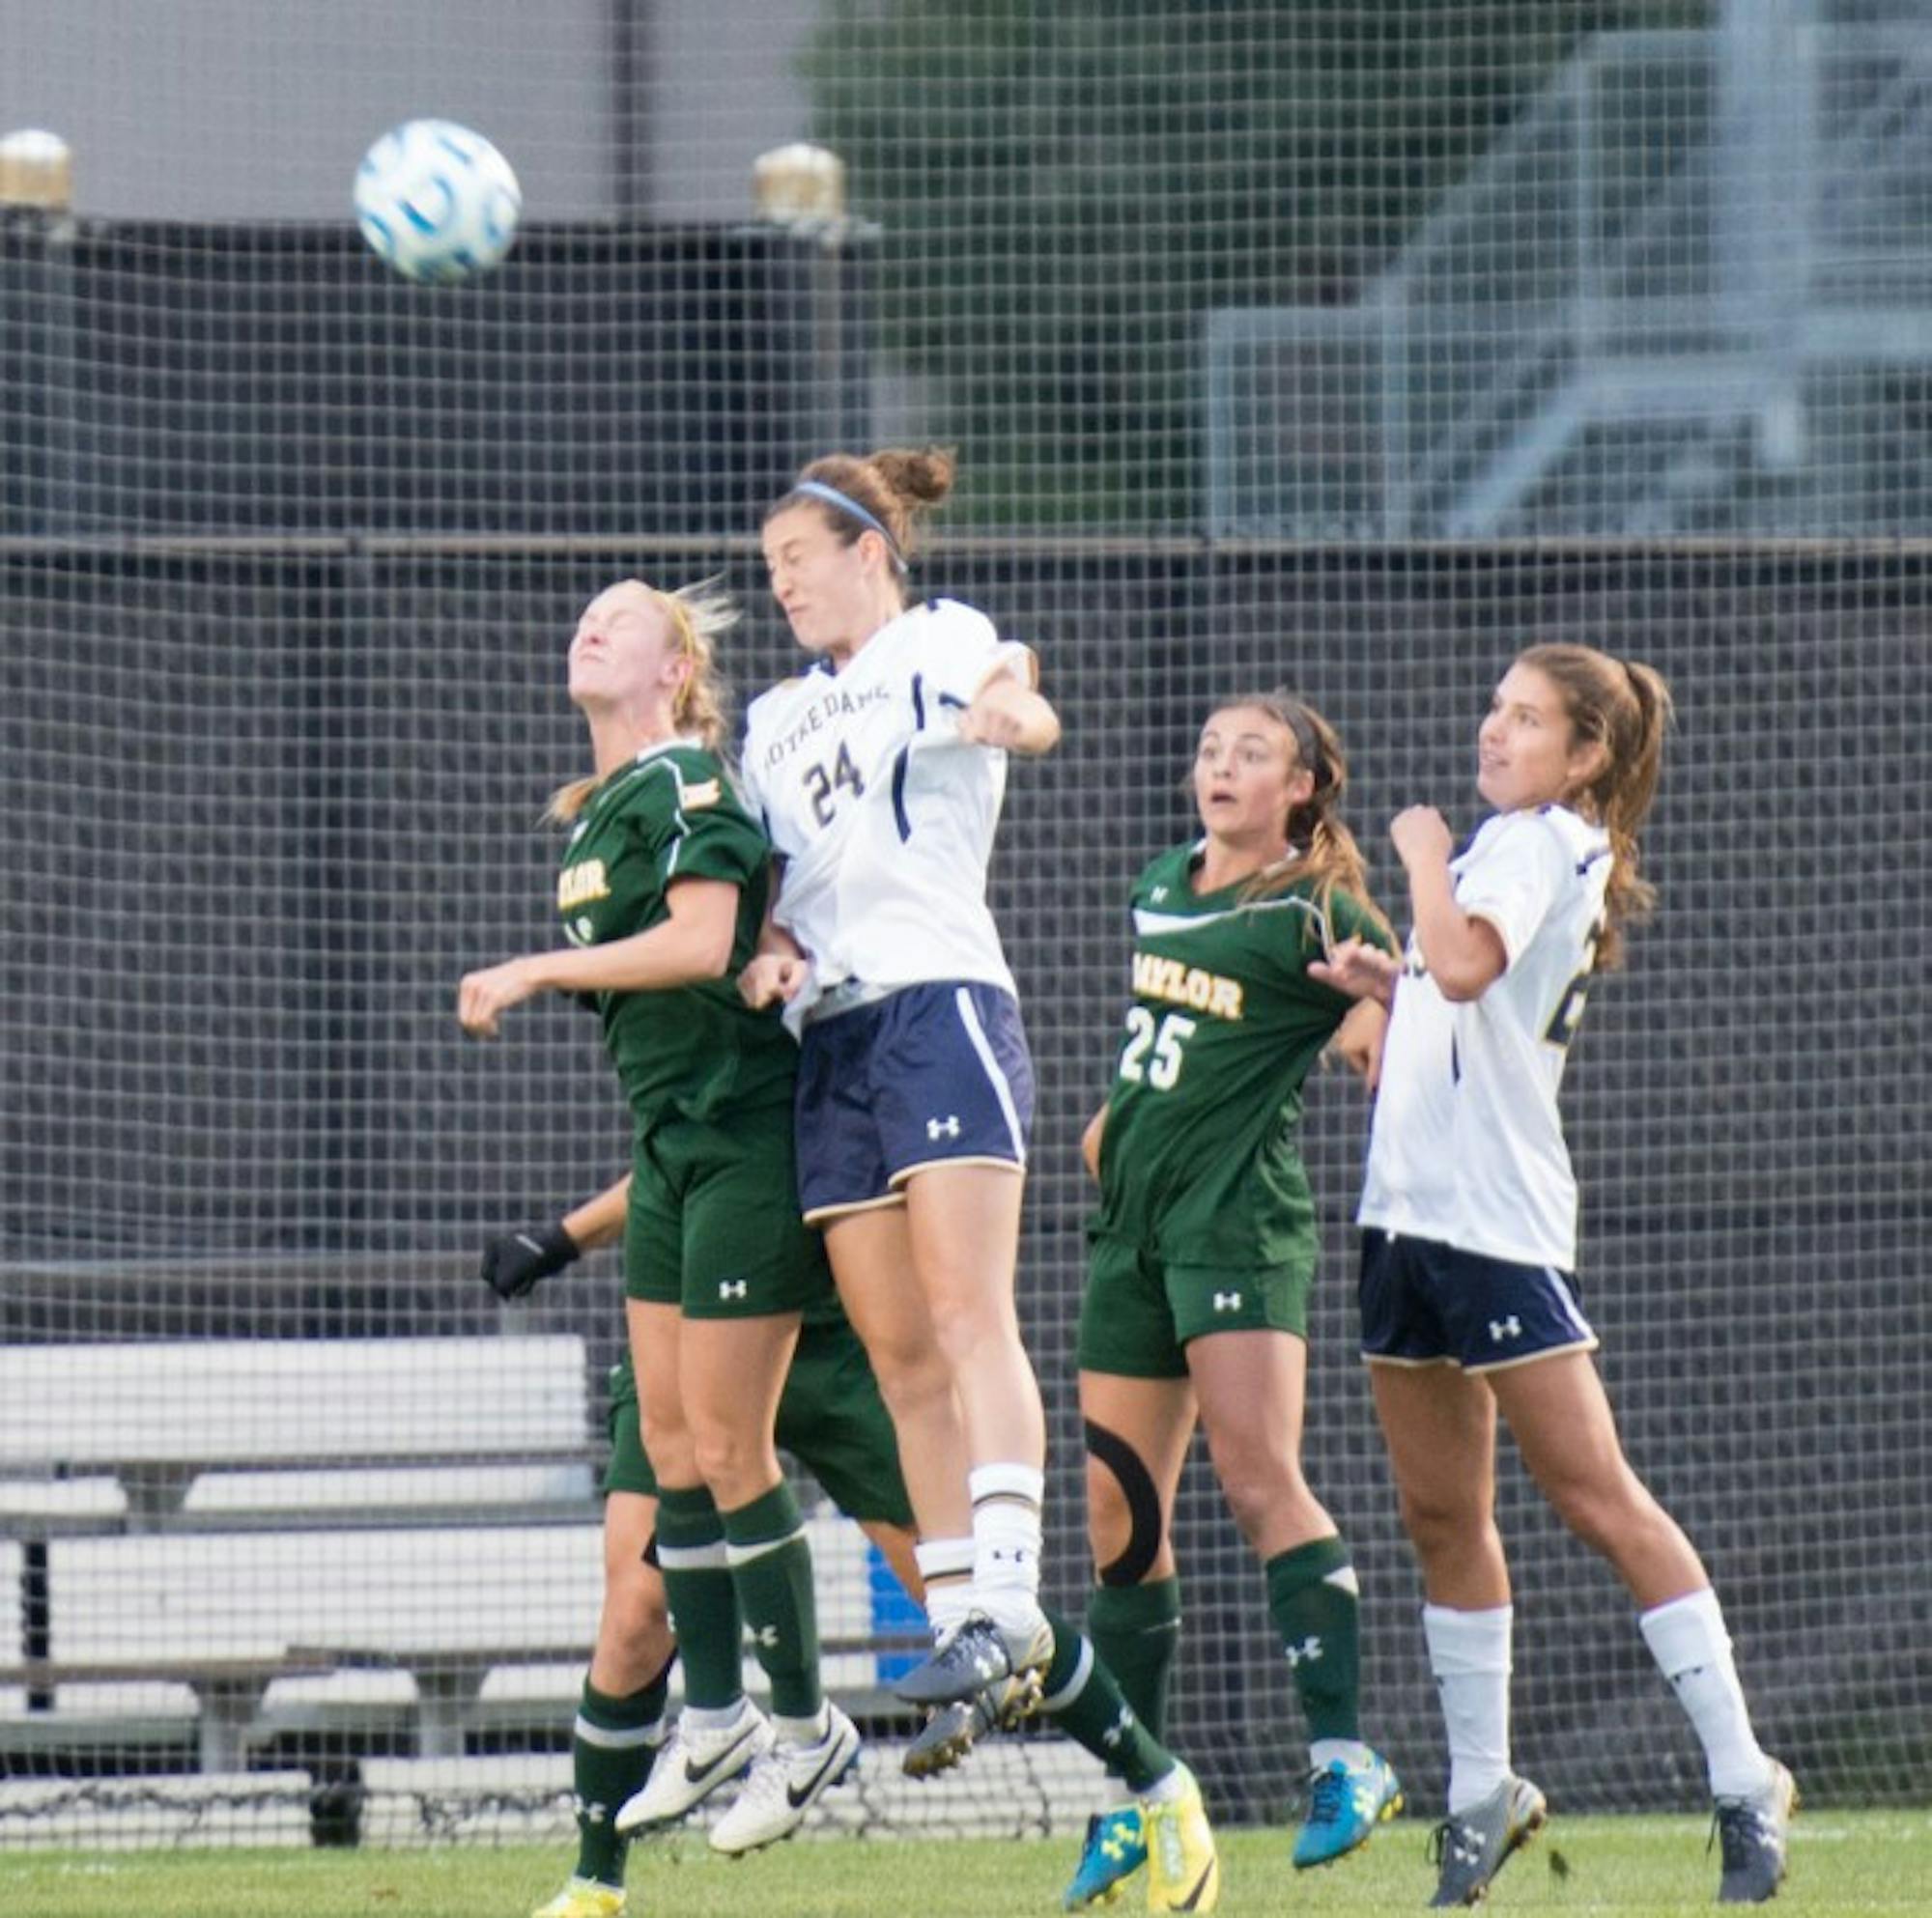 Irish junior defender Katie Naughton heads a shot over the defender during Notre Dame’s 1-0 victory over Baylor on Friday.